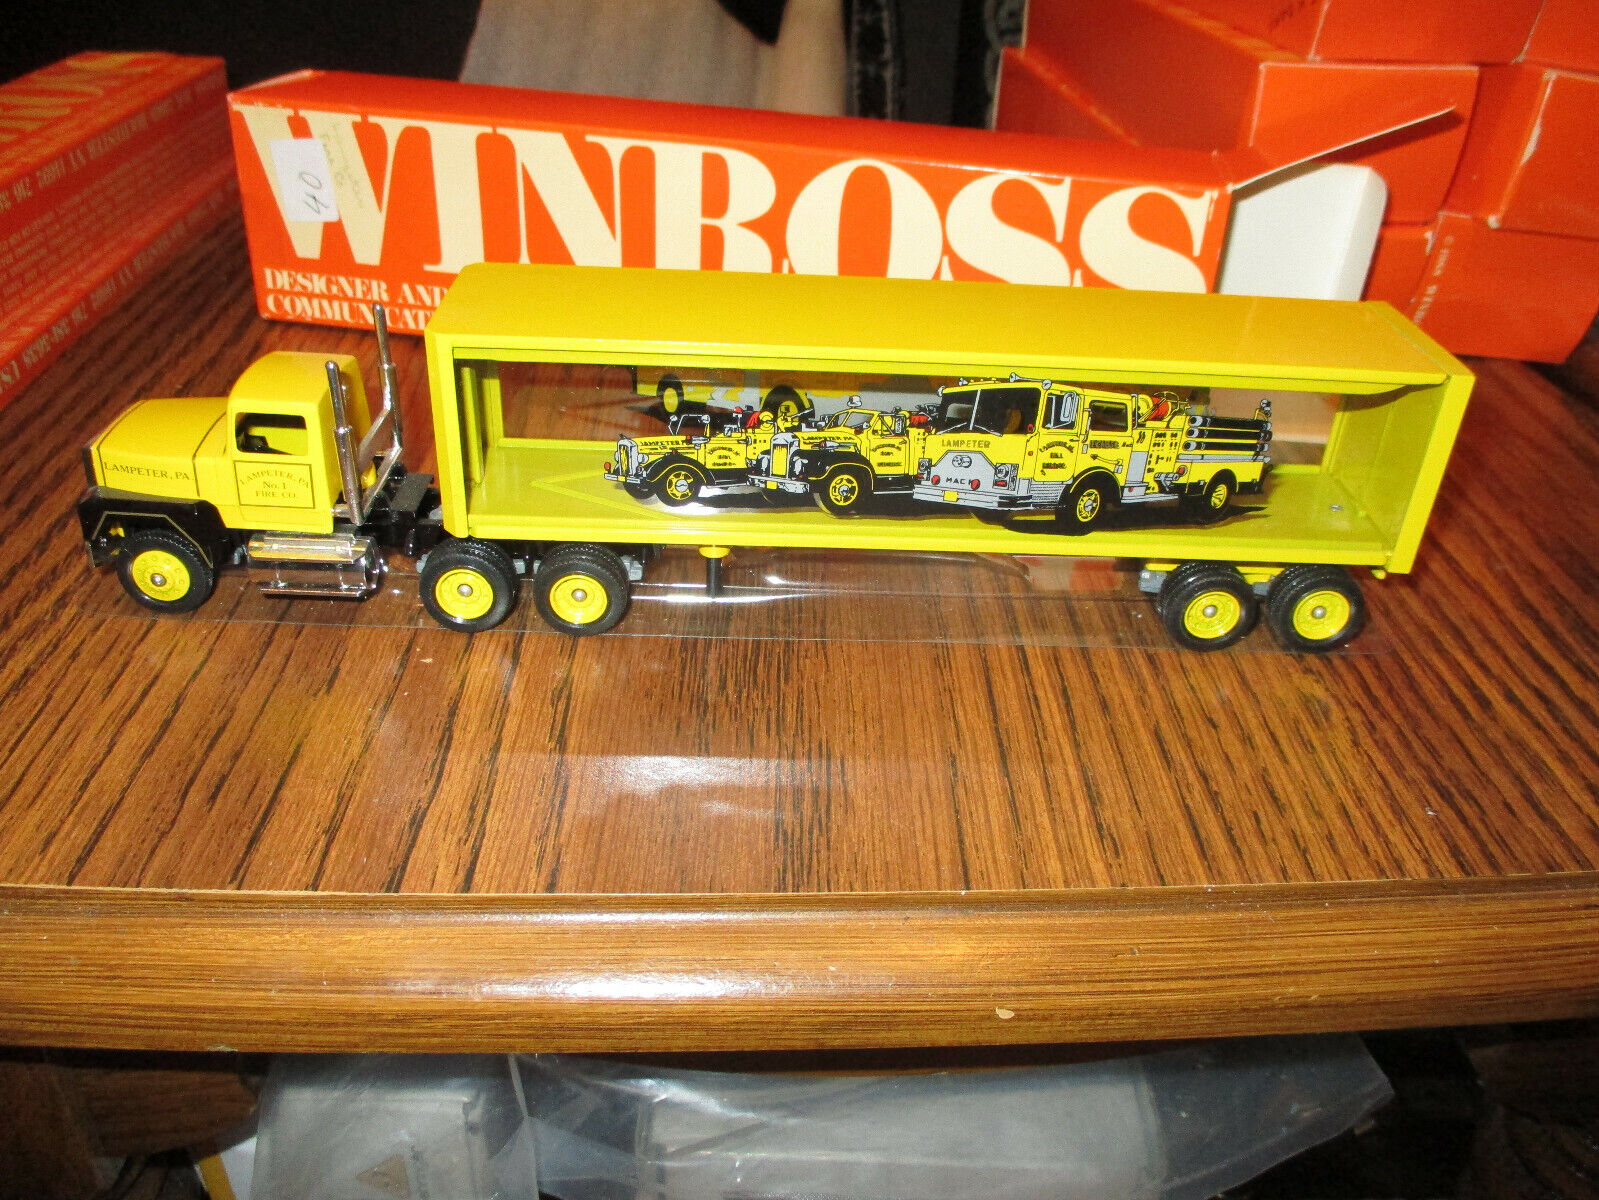 WINROSS TRUCK MIB LAMPETER FIRE CO. SUPER RARE CLEAR SIDE TRAILER 